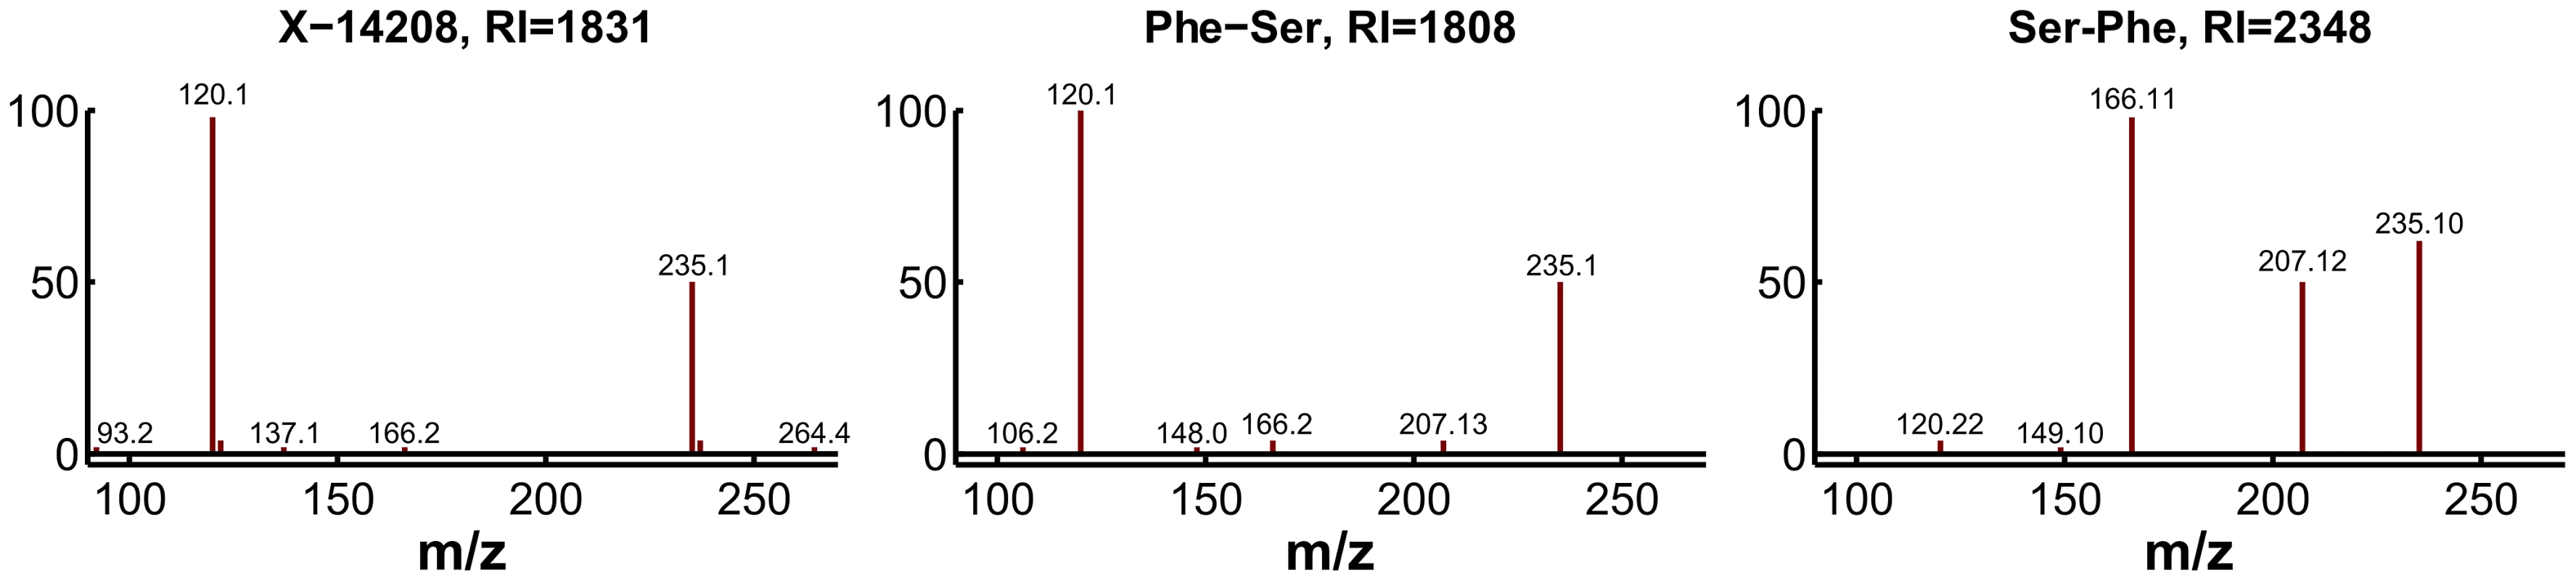 Experimental confirmation of X-14208 as phenylalanylserine.